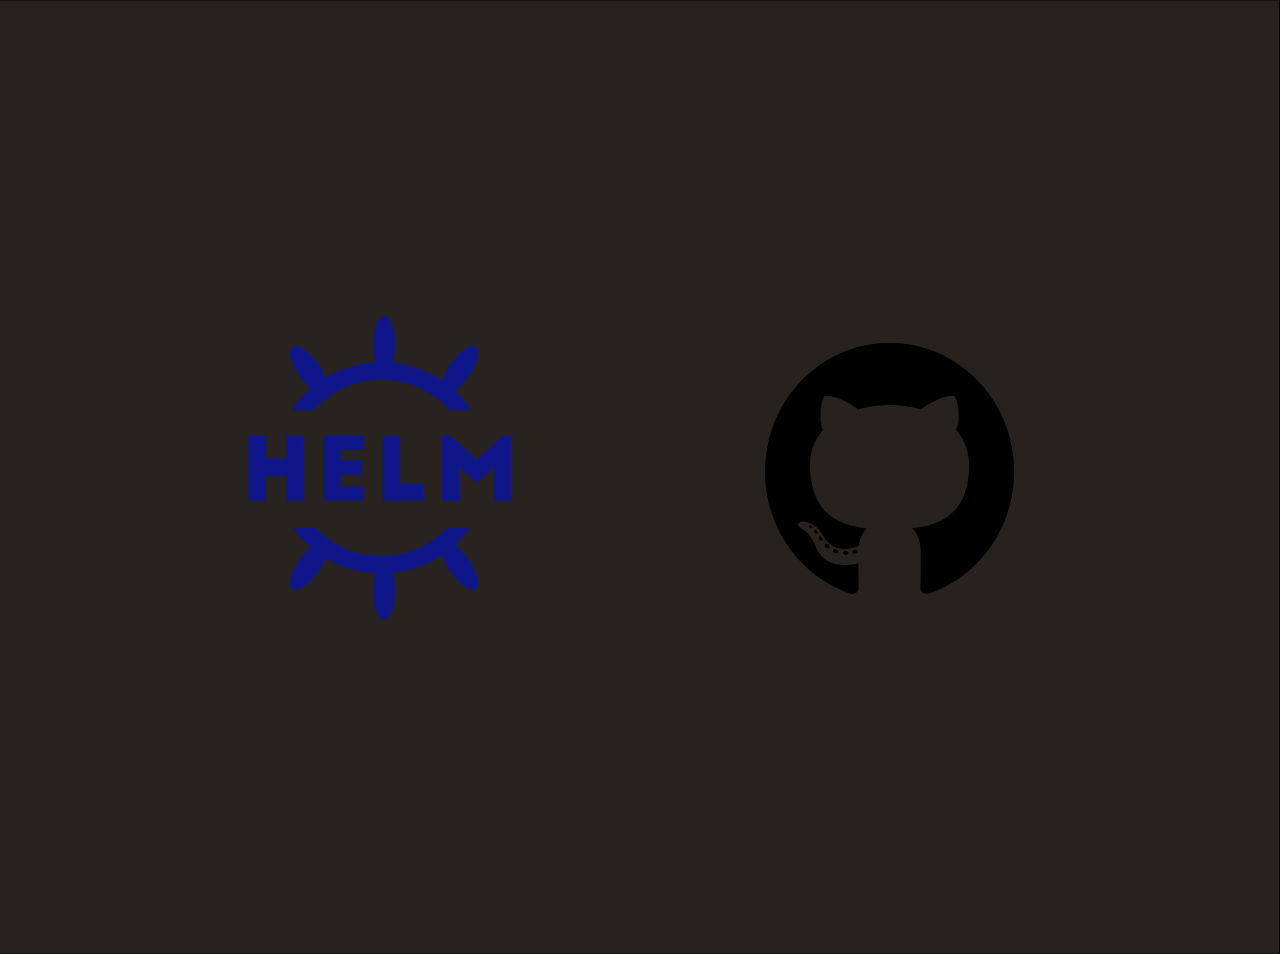 Publish Helm chart using GitHub pages